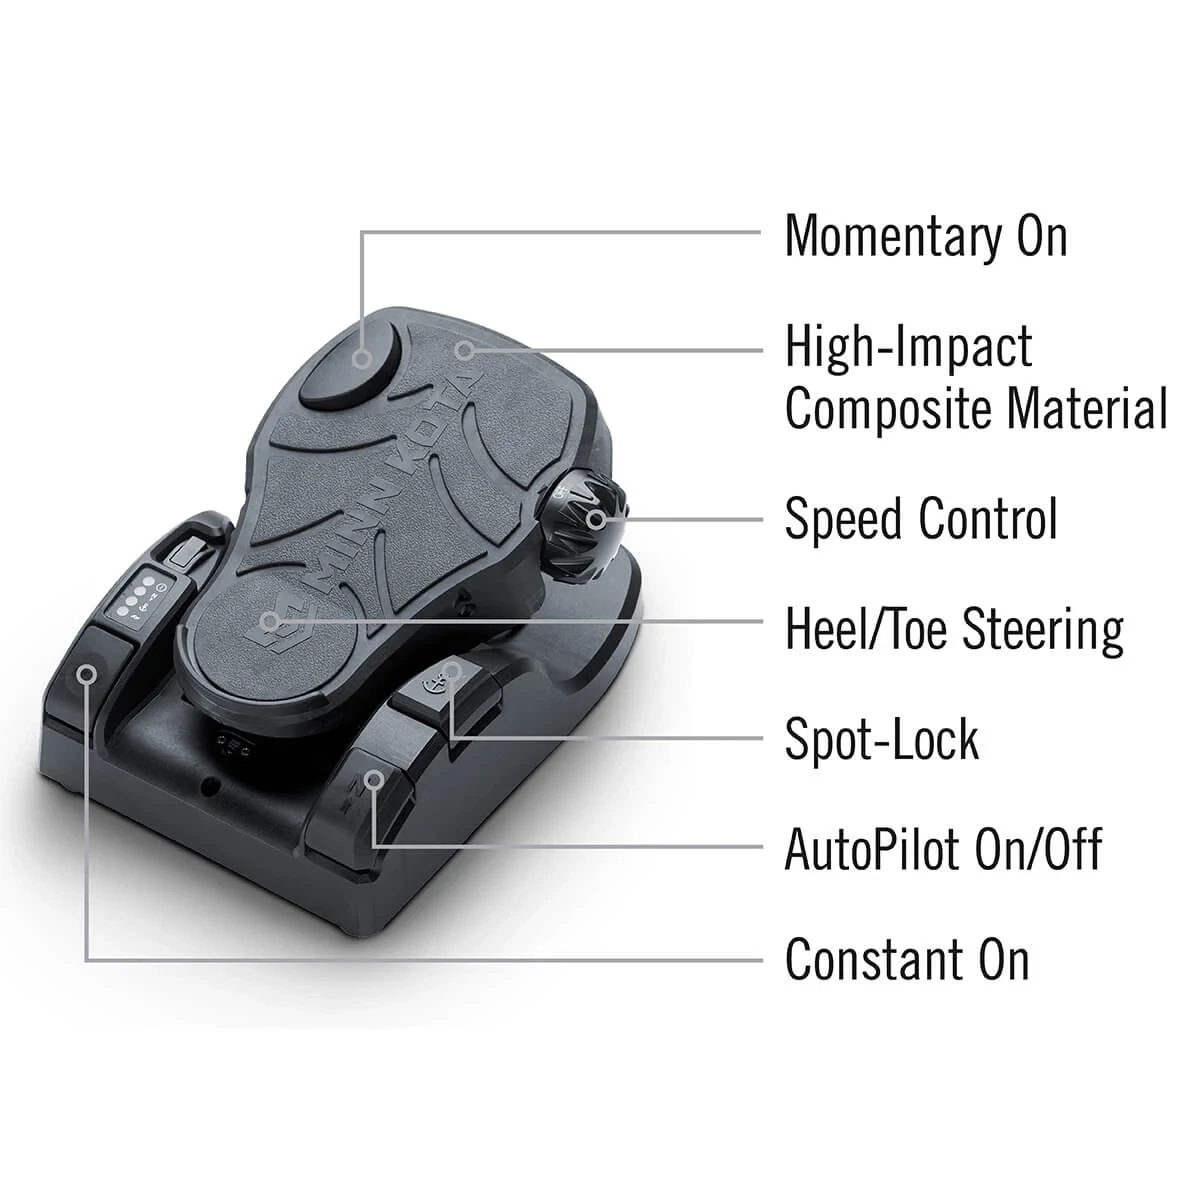 Ultrex foot pedal with feature callouts